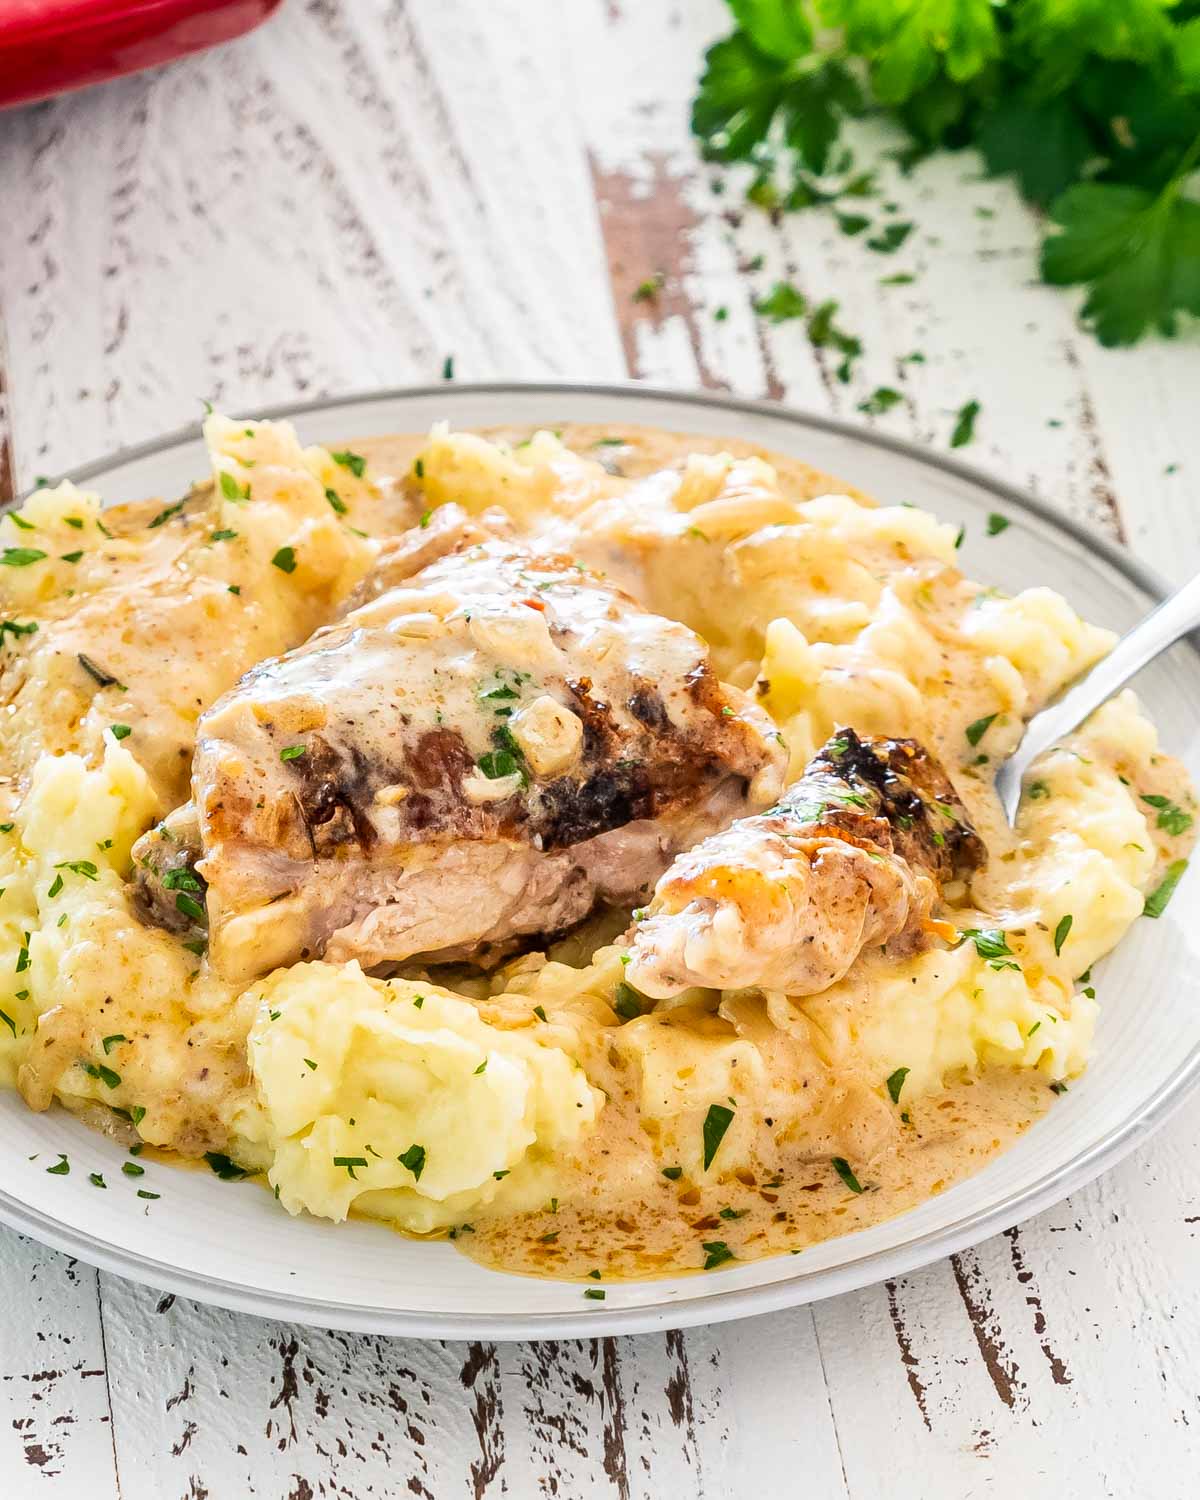 a chicken thigh with sauce on a bed of mashed potatoes.